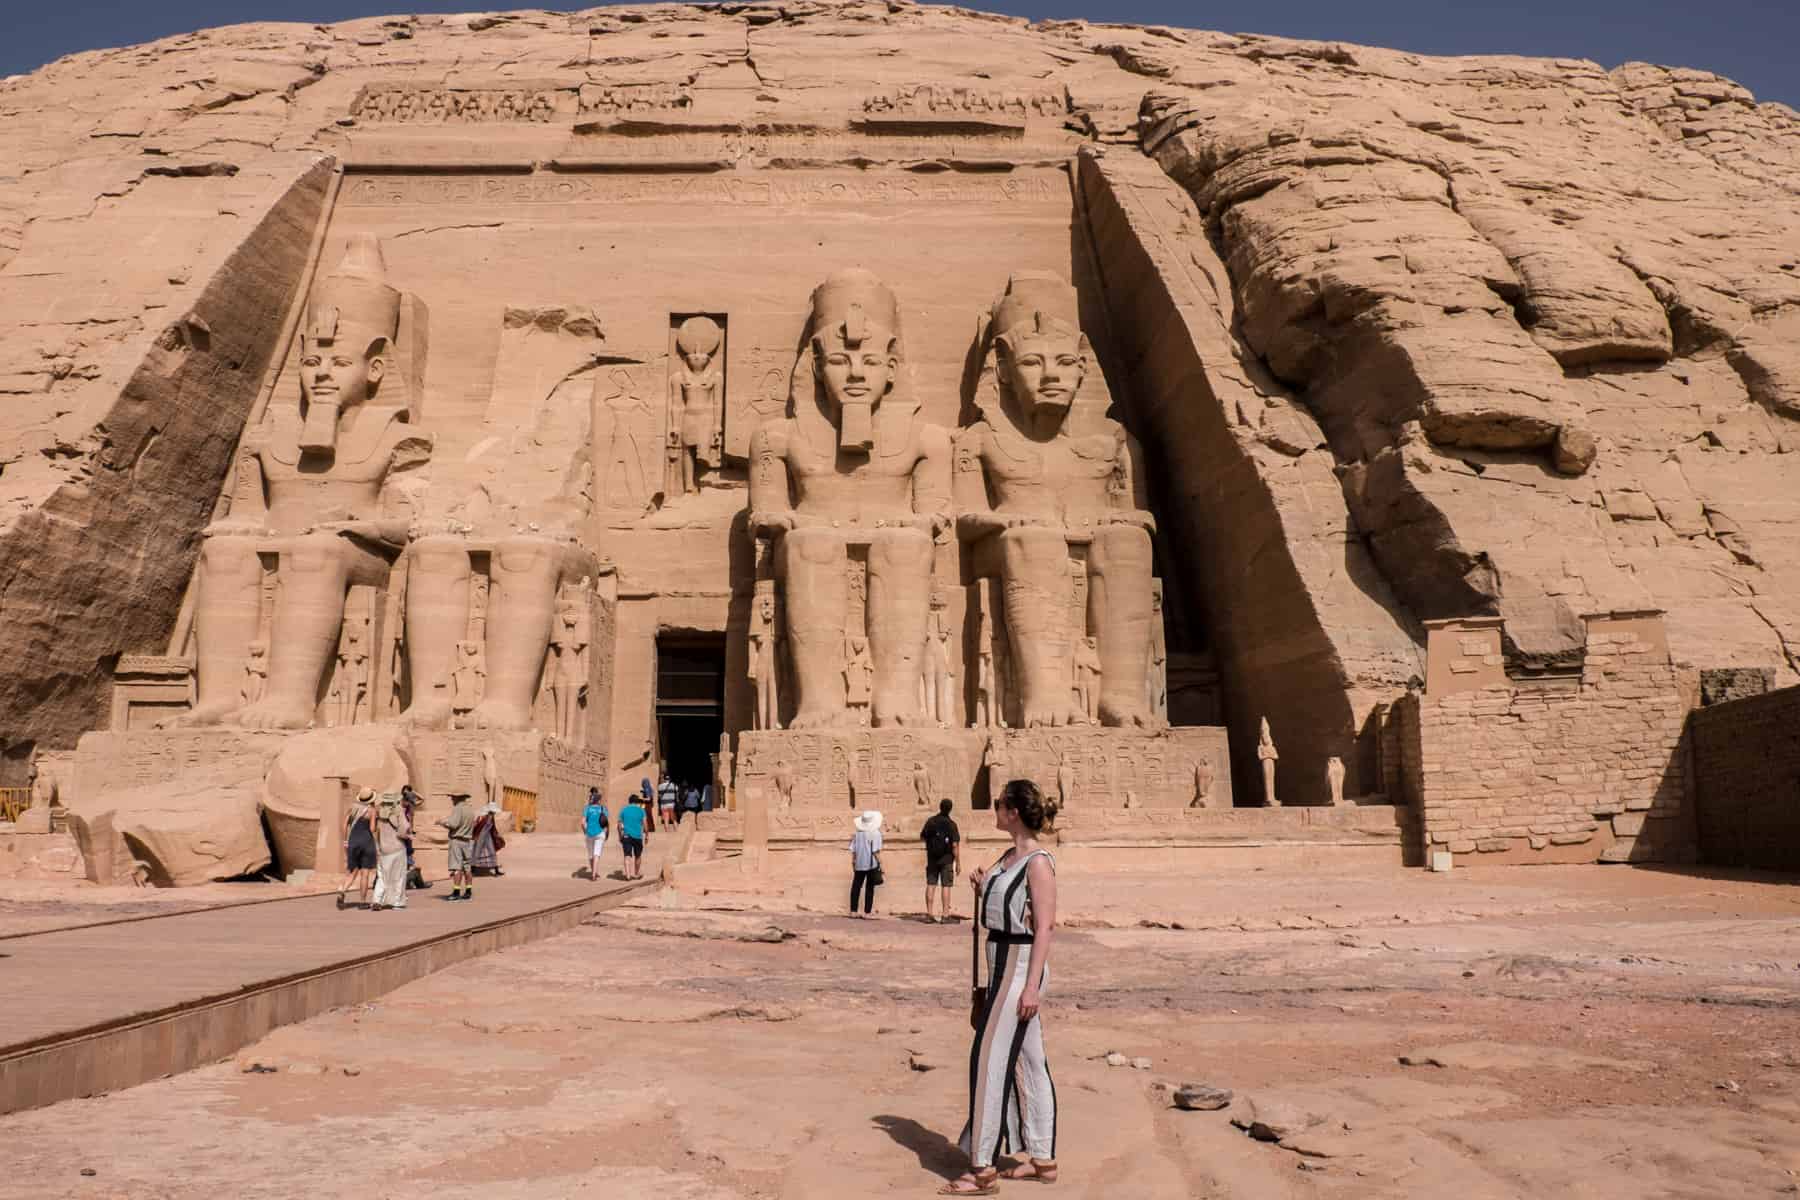 The main mountain carved temple of Abu Simbel dedicated to Ramesses II whose colossal statues line the entrance